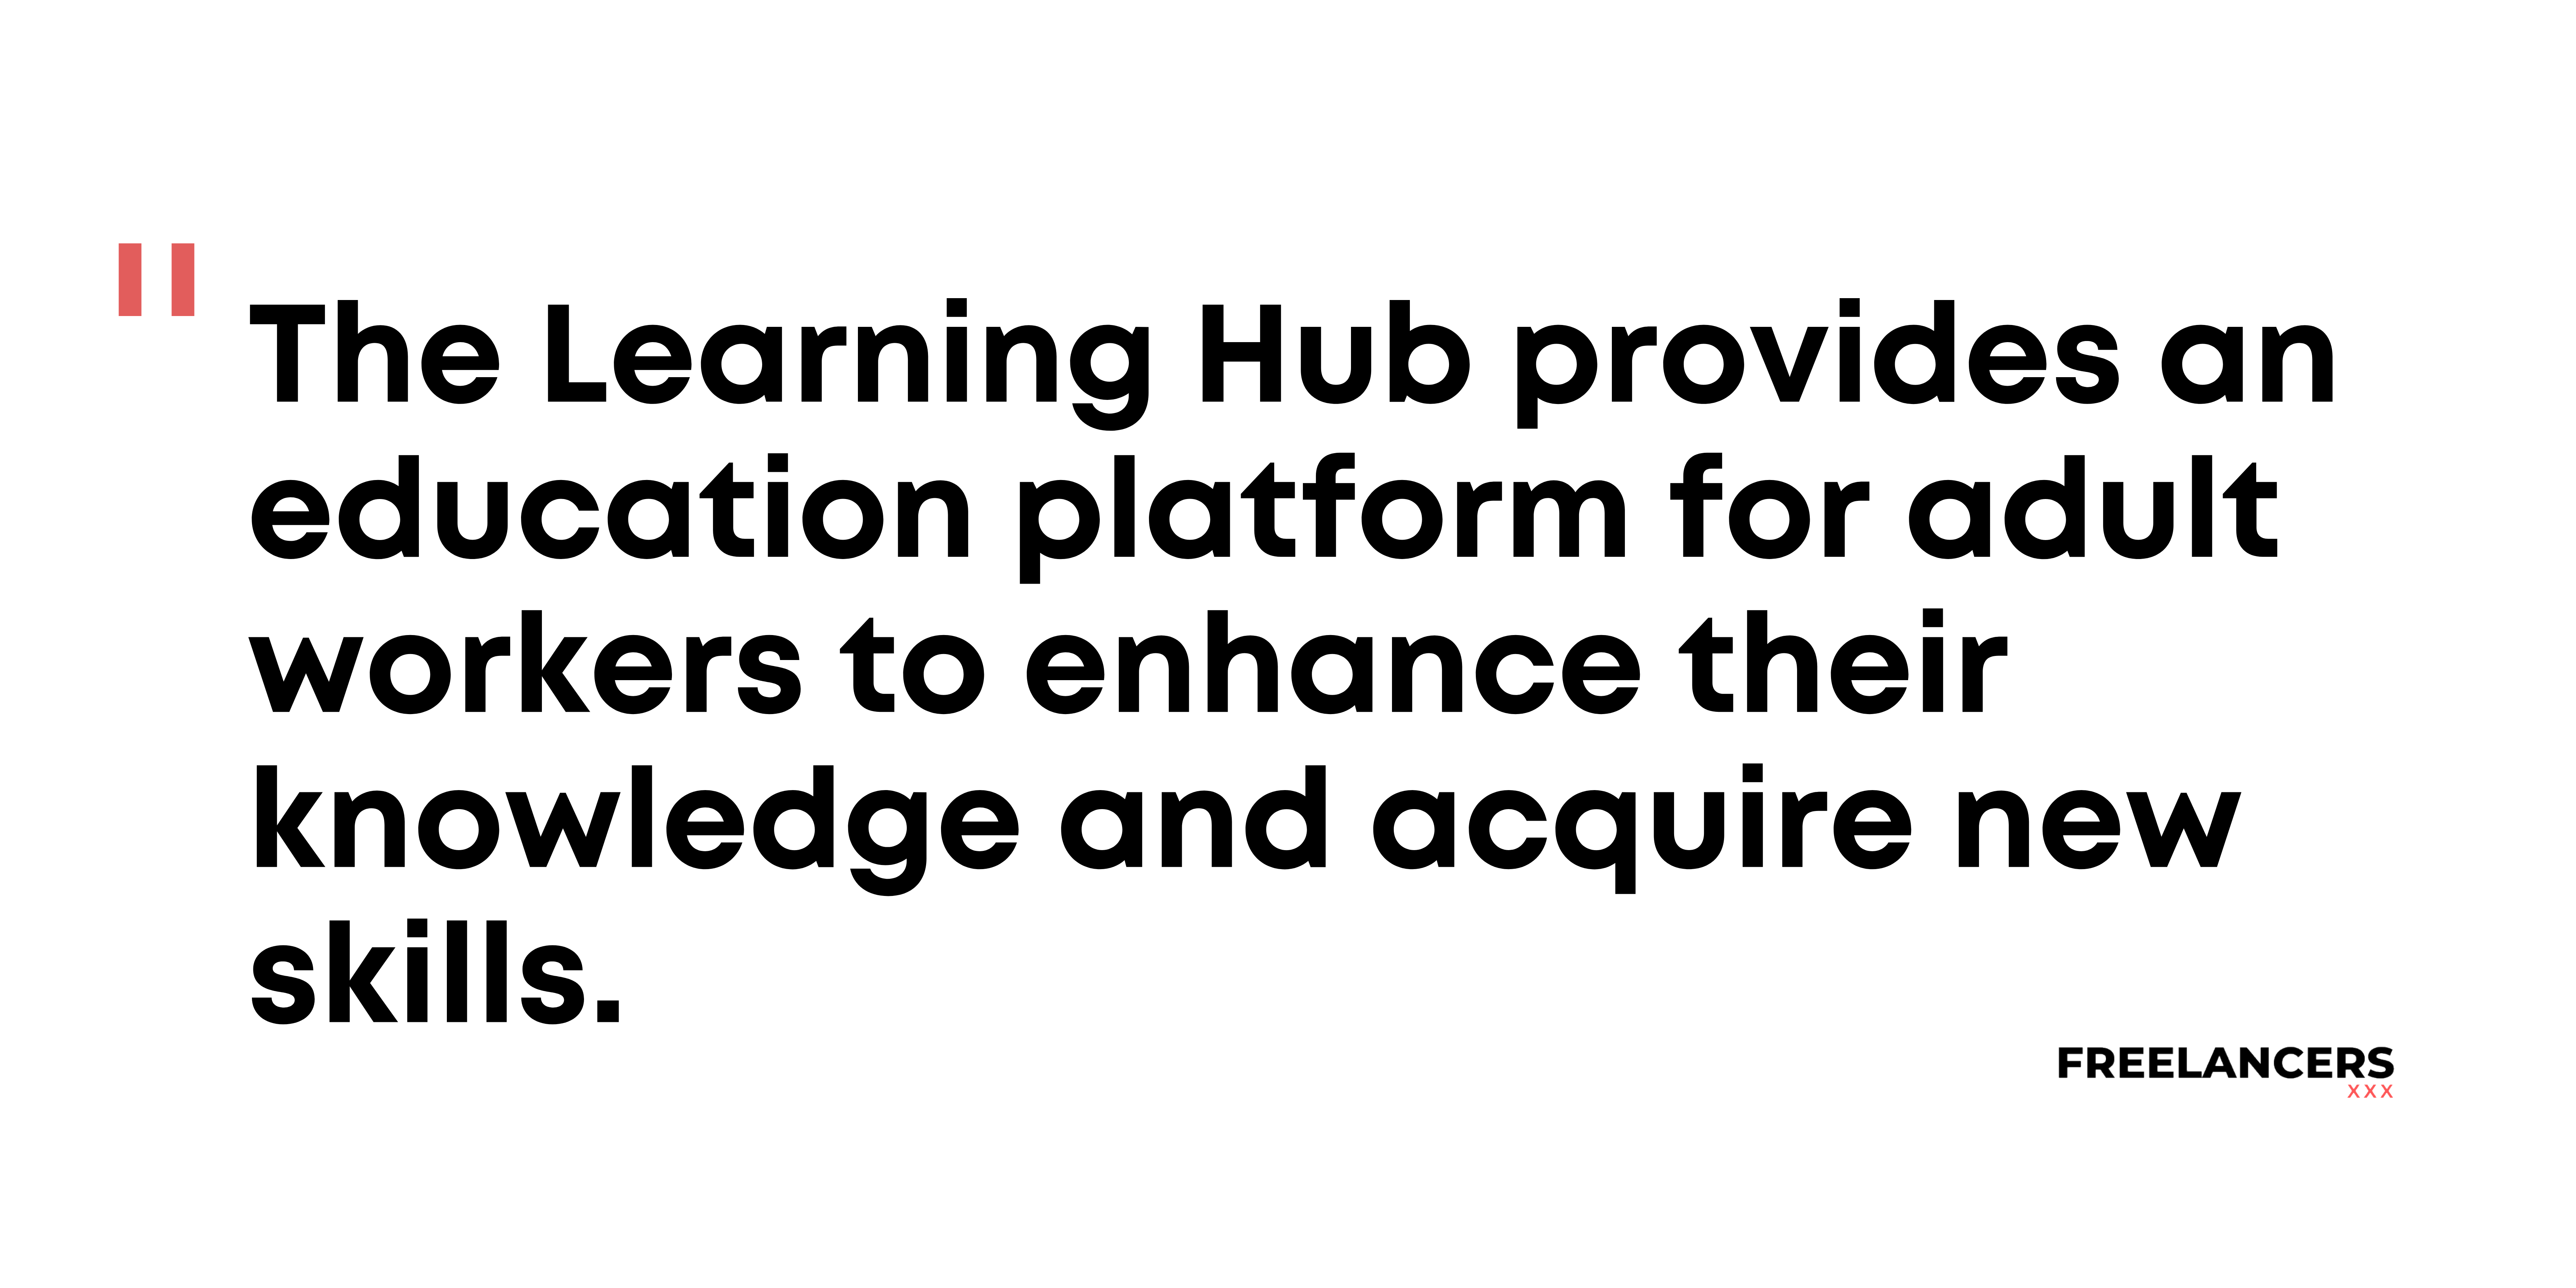 Introducing the new learning hub